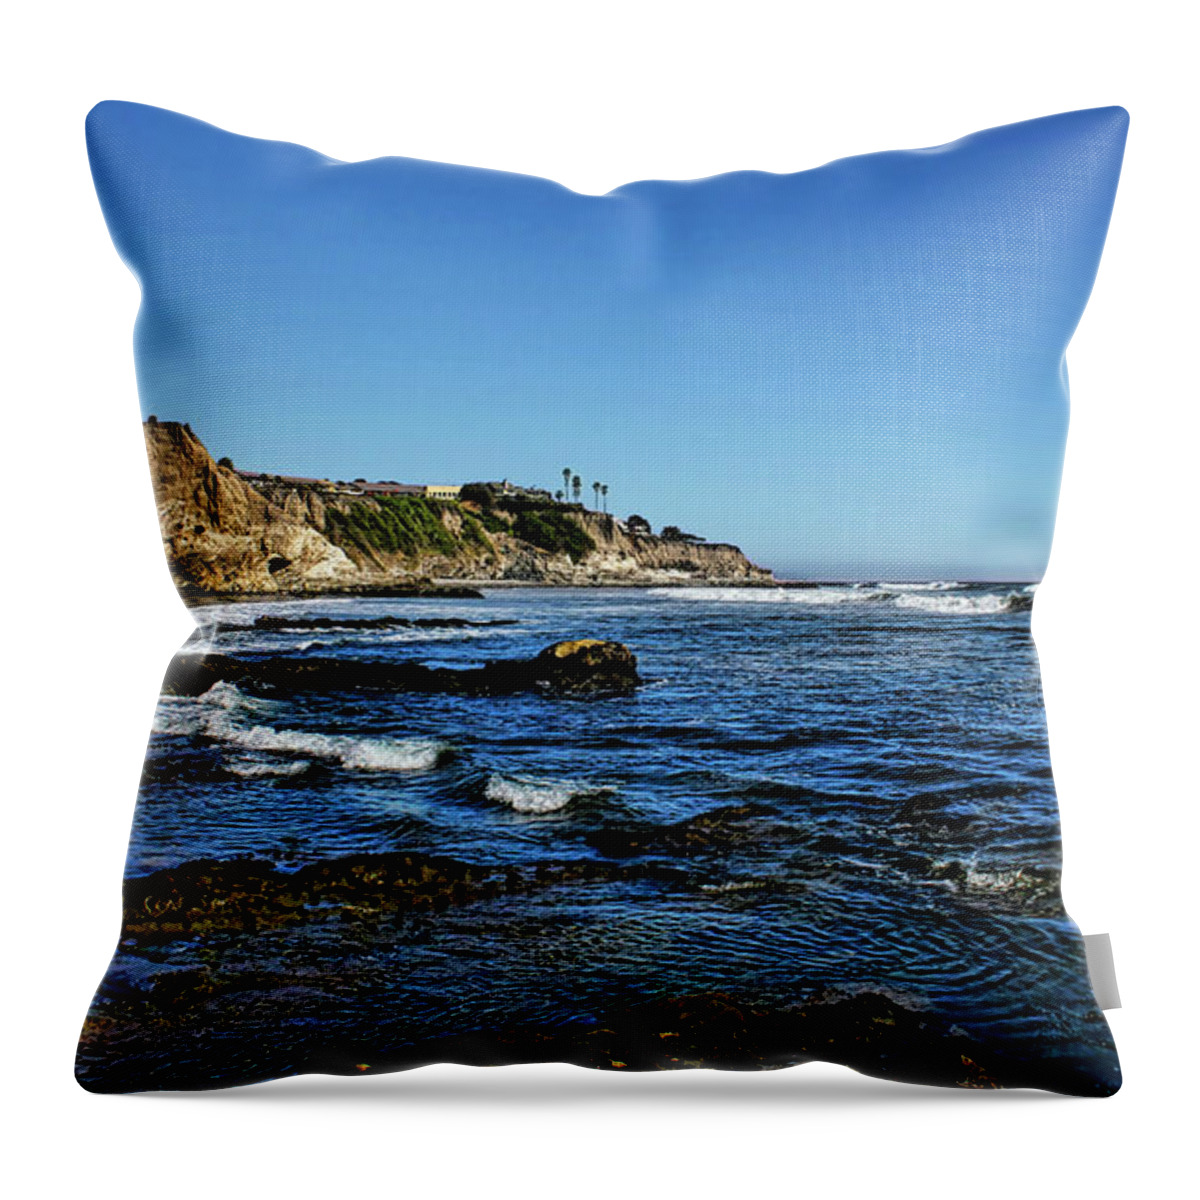 Pismo Beach Throw Pillow featuring the photograph The Cliffs of Pismo Beach by Judy Vincent